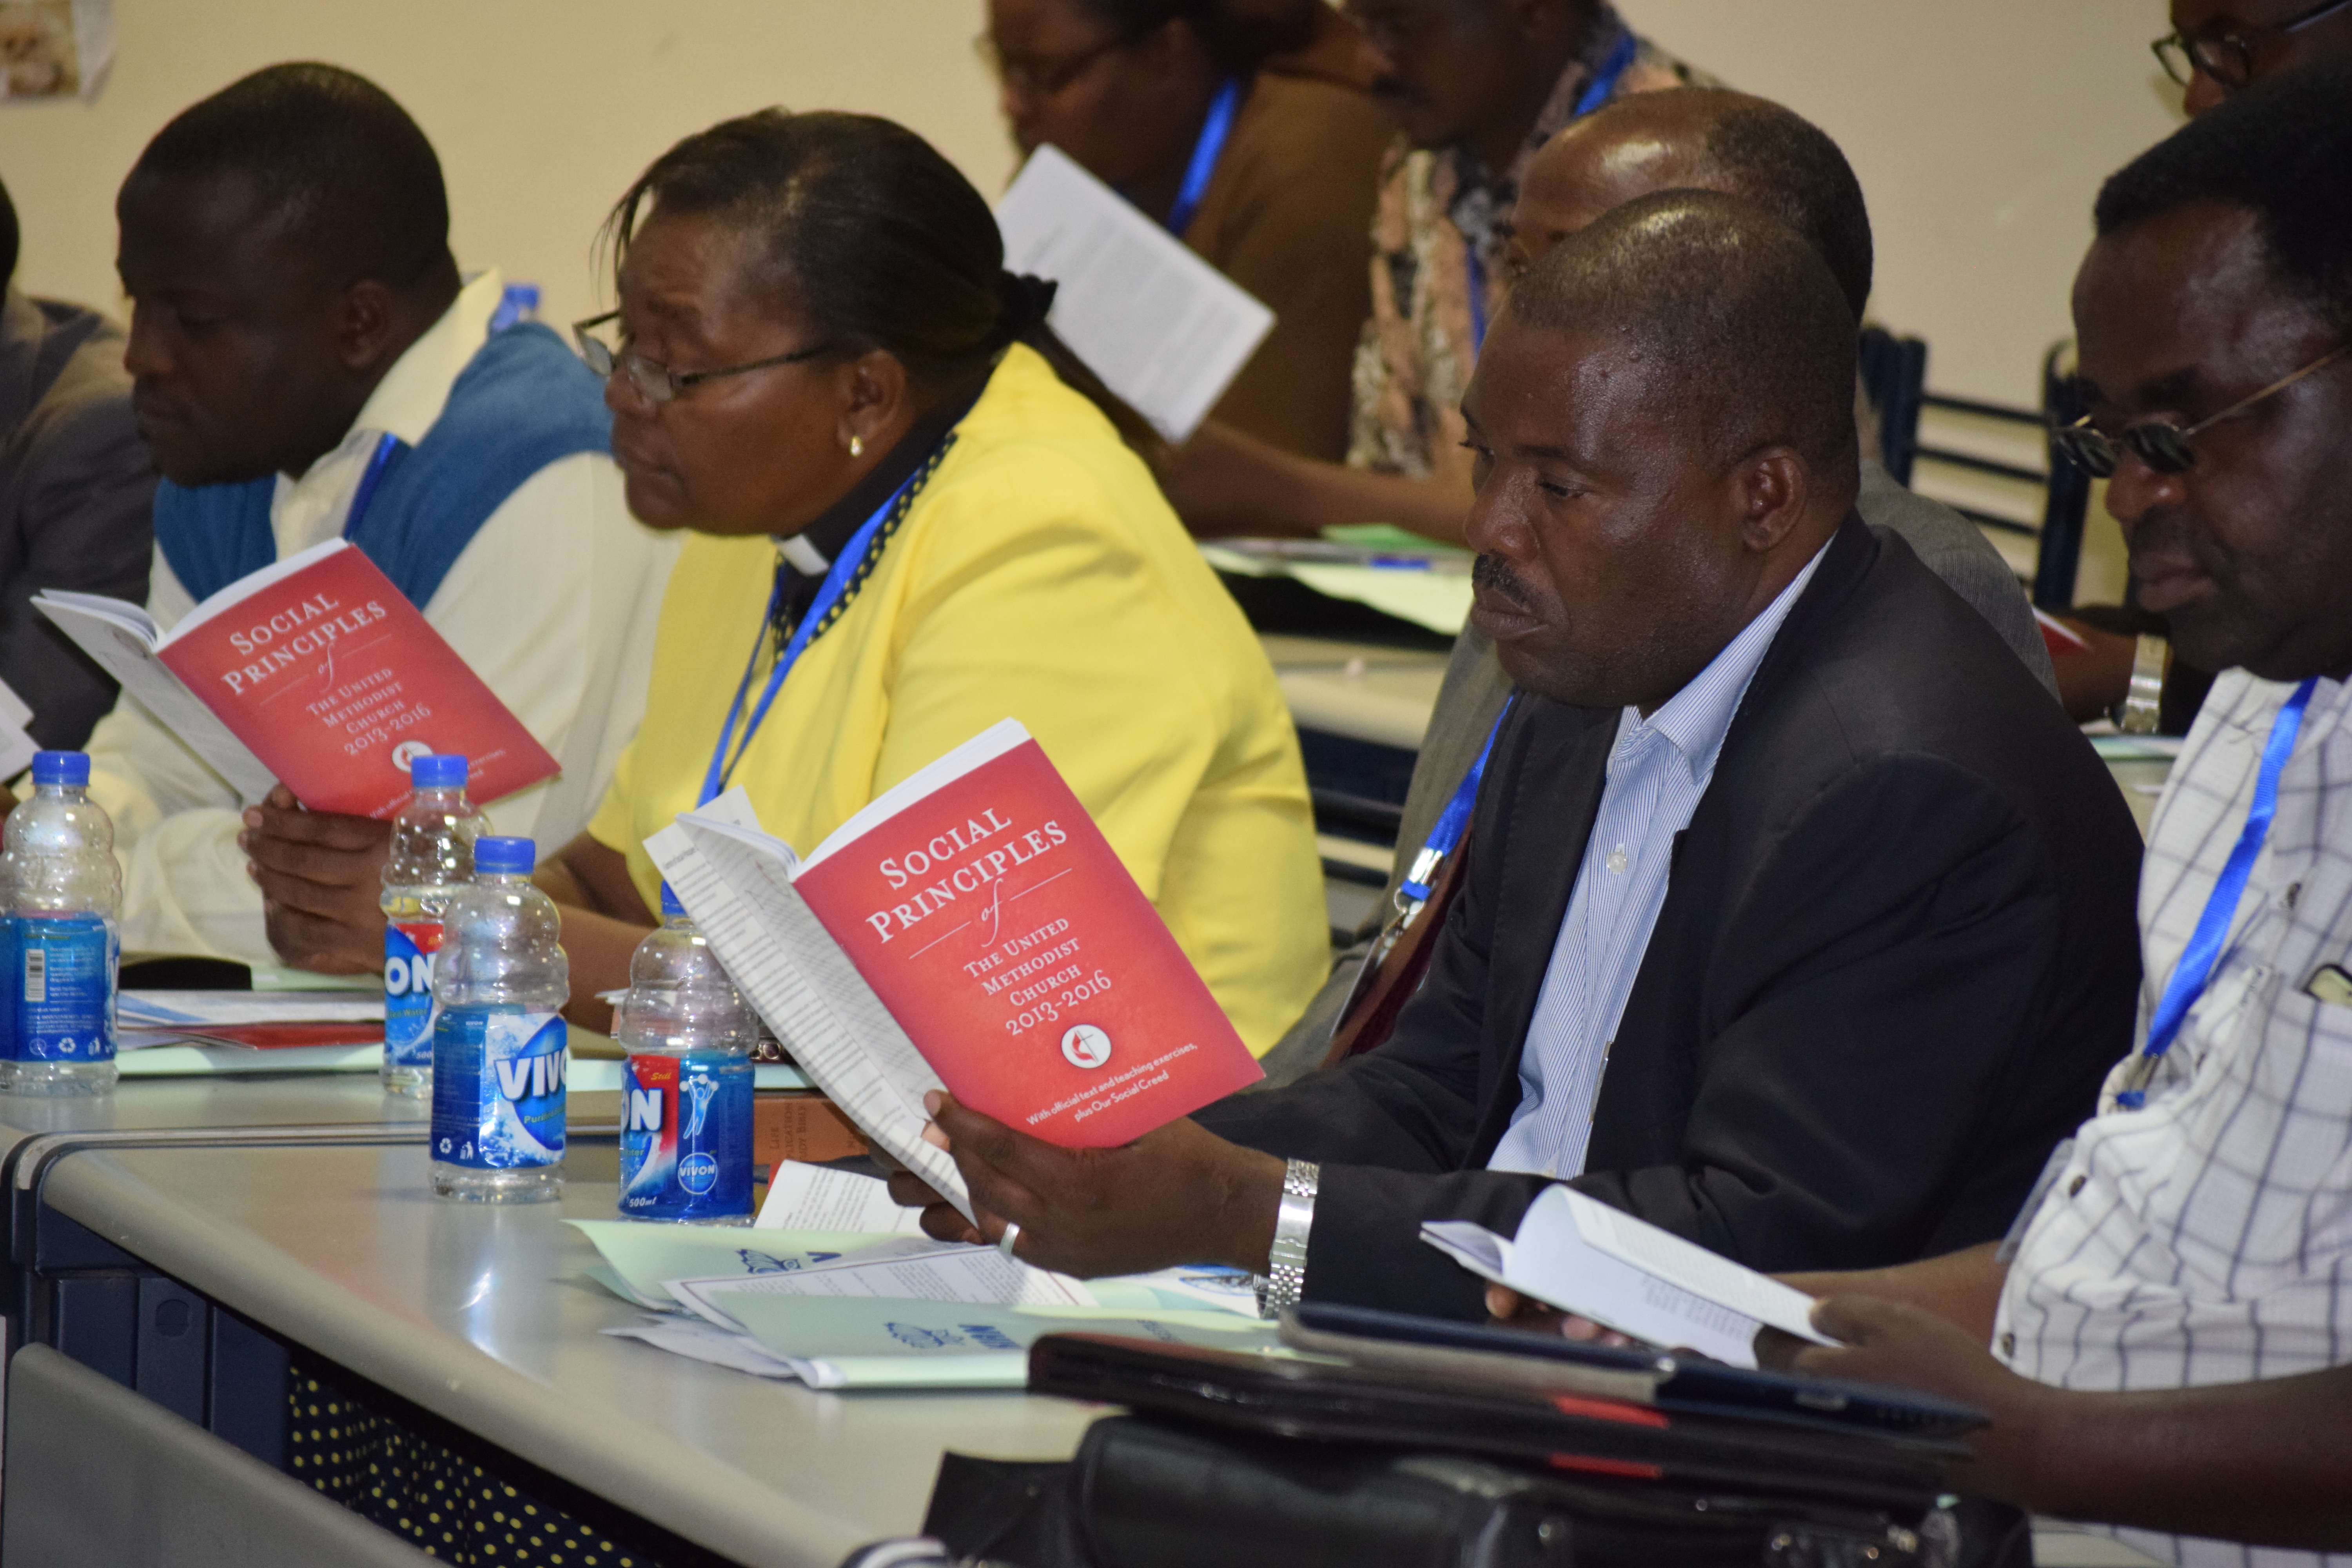 Attendees study of a Social Principles Training at Africa University in 2017 study their copies of the principles. File photo courtesy of Church and Society.